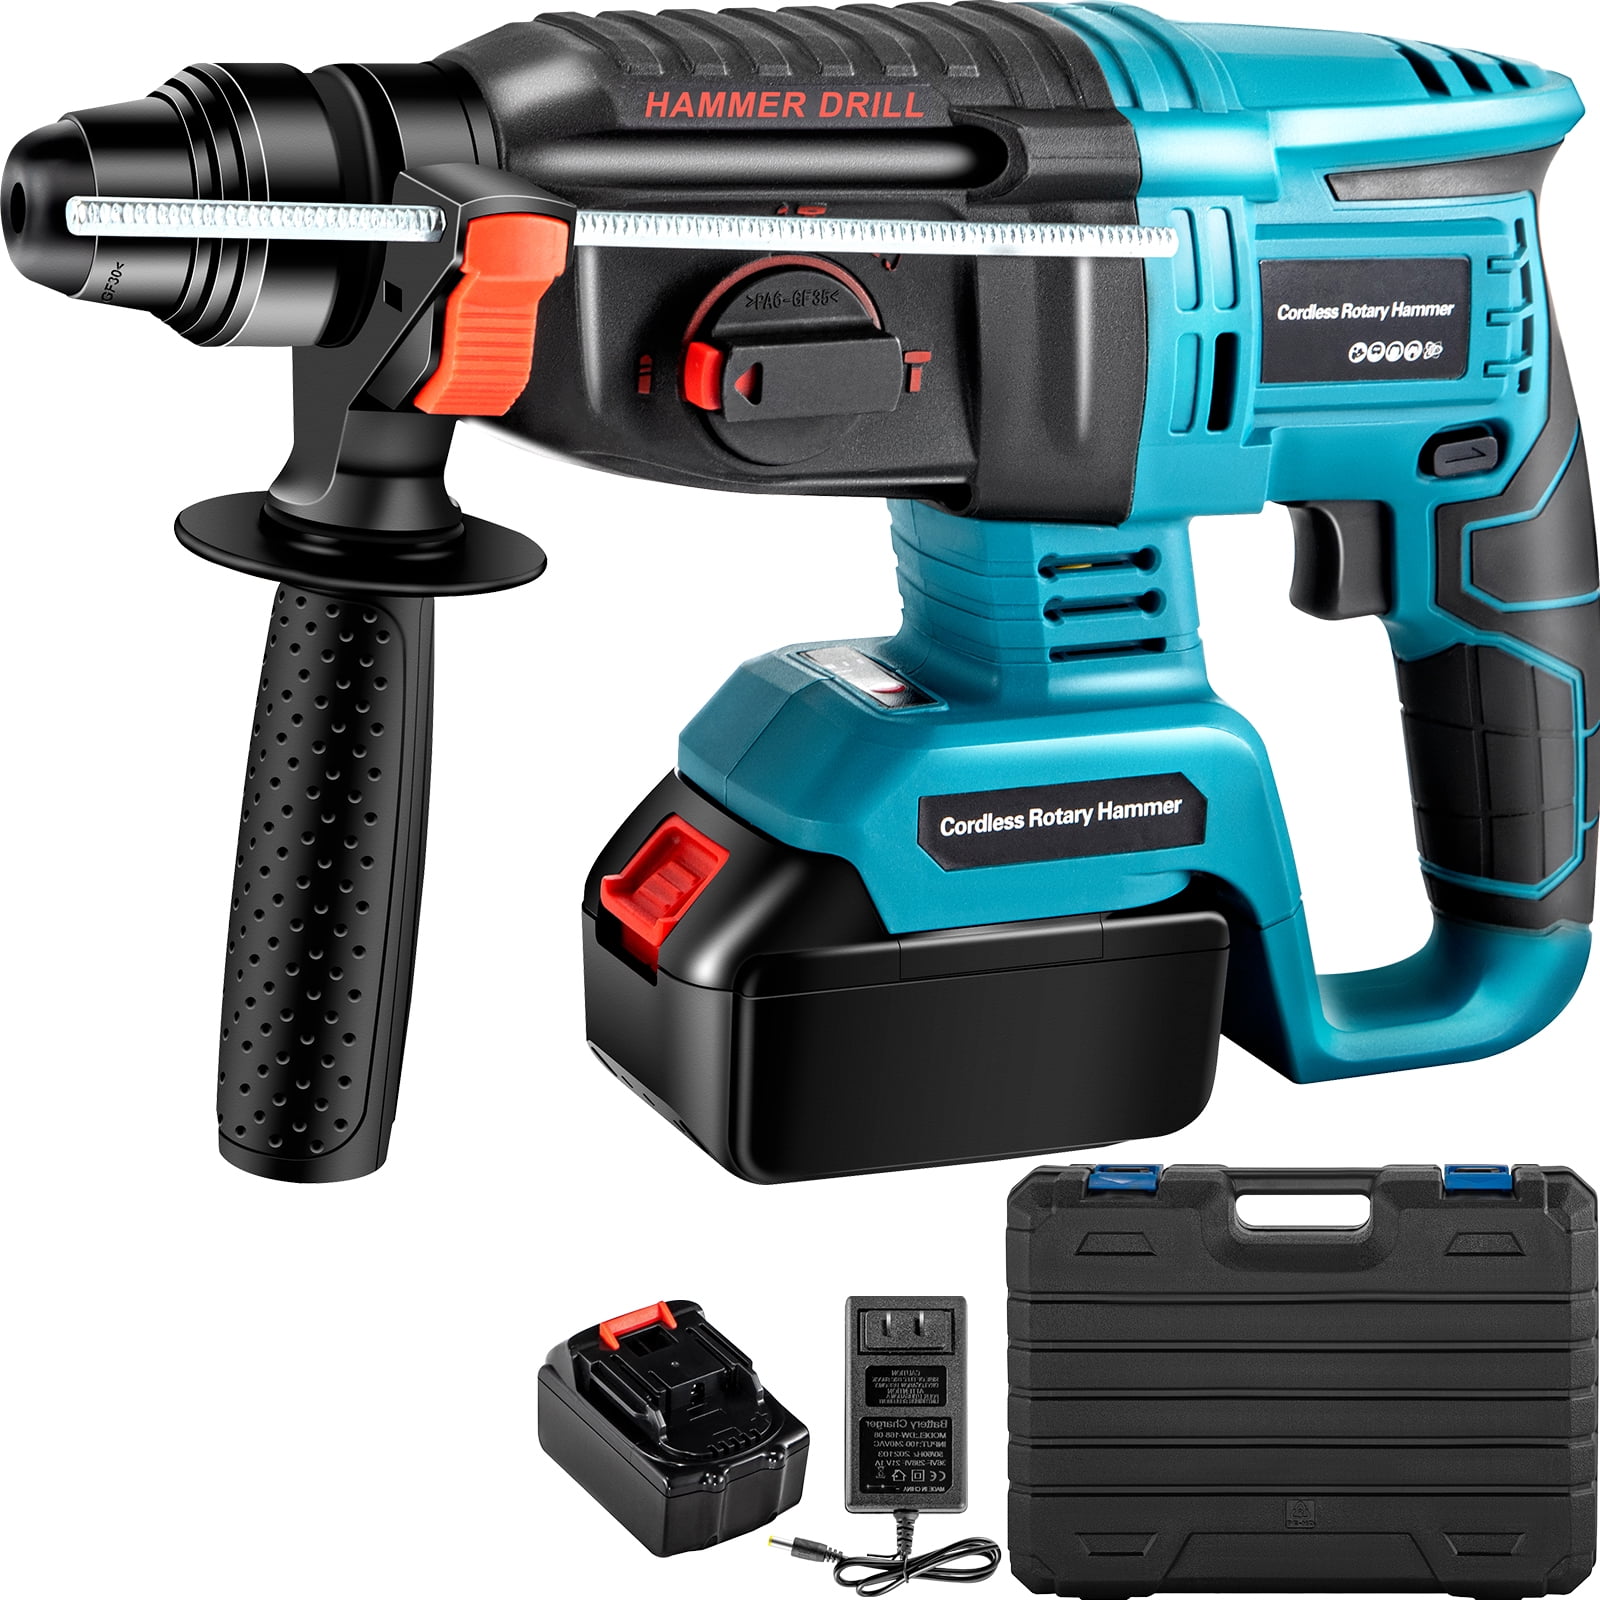 VEVOR SDS-Plus Rotary Drill, 1400 rpm & 450 bpm Variable Speed Electric Hammer, 4 IN 1 Cordless Drill, Measurable Hammer Ideal 1 for Concrete, Steel, and Wood - Walmart.com